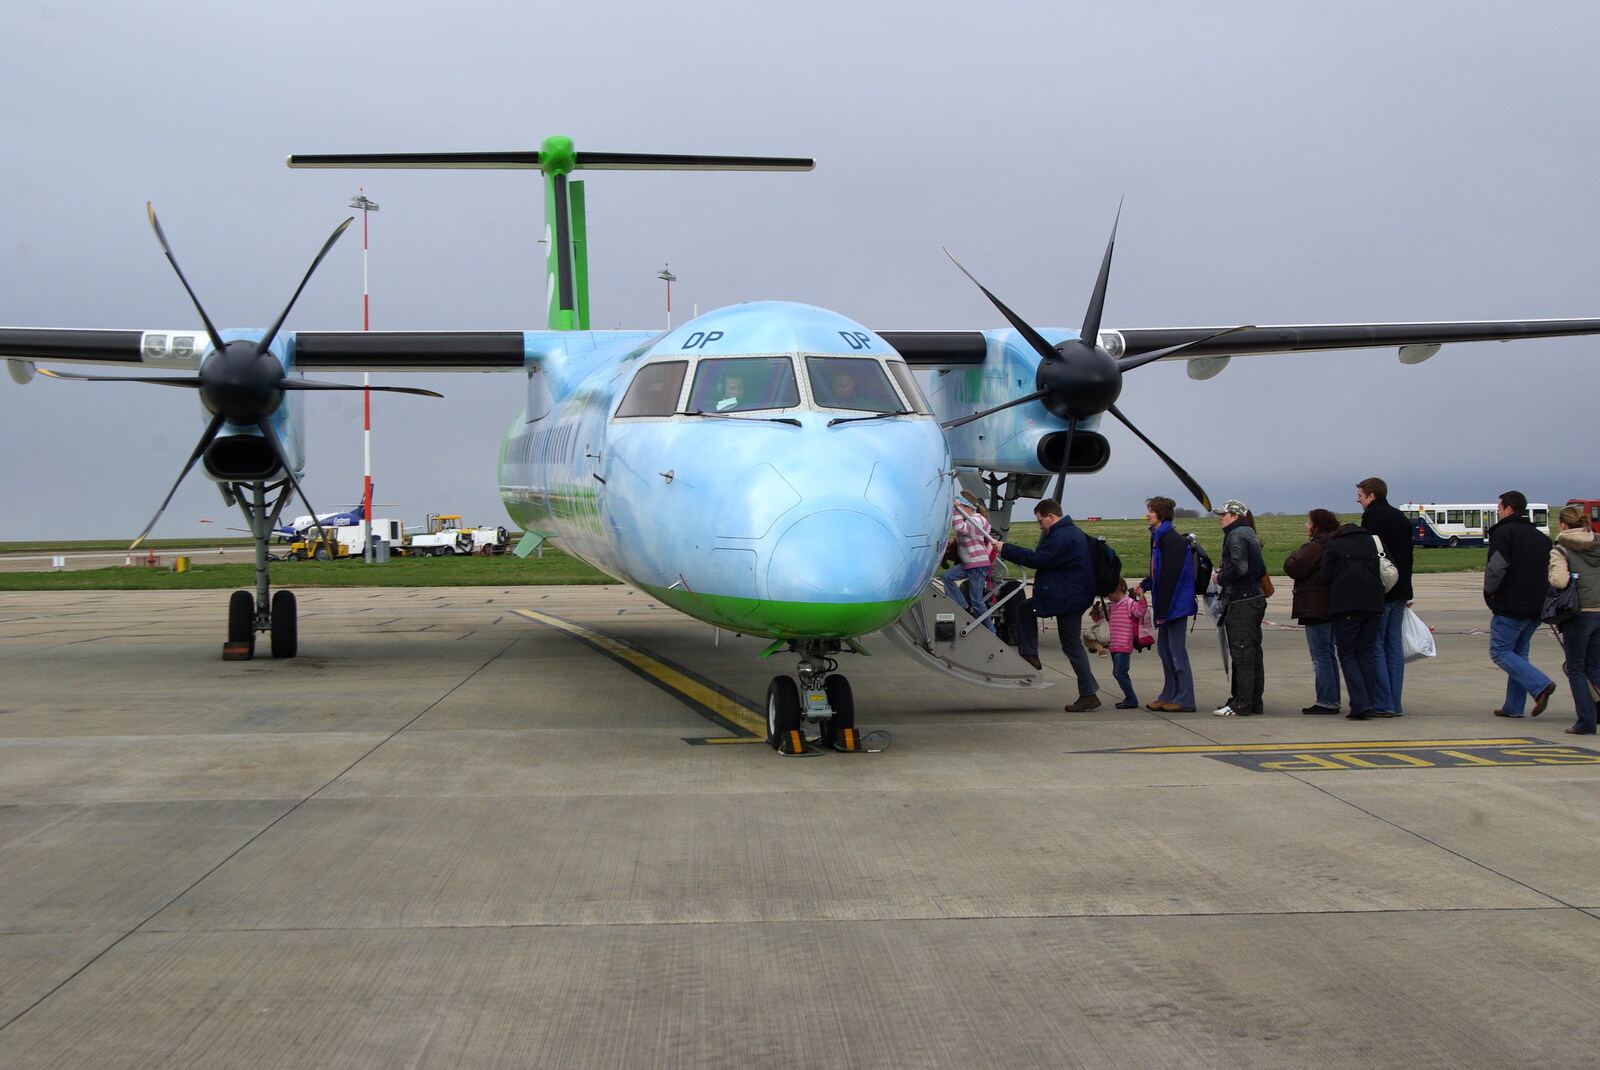 Easter in Dublin, Ireland - 21st March 2008: The FlyBE Dash 8 loads up on the tarmac